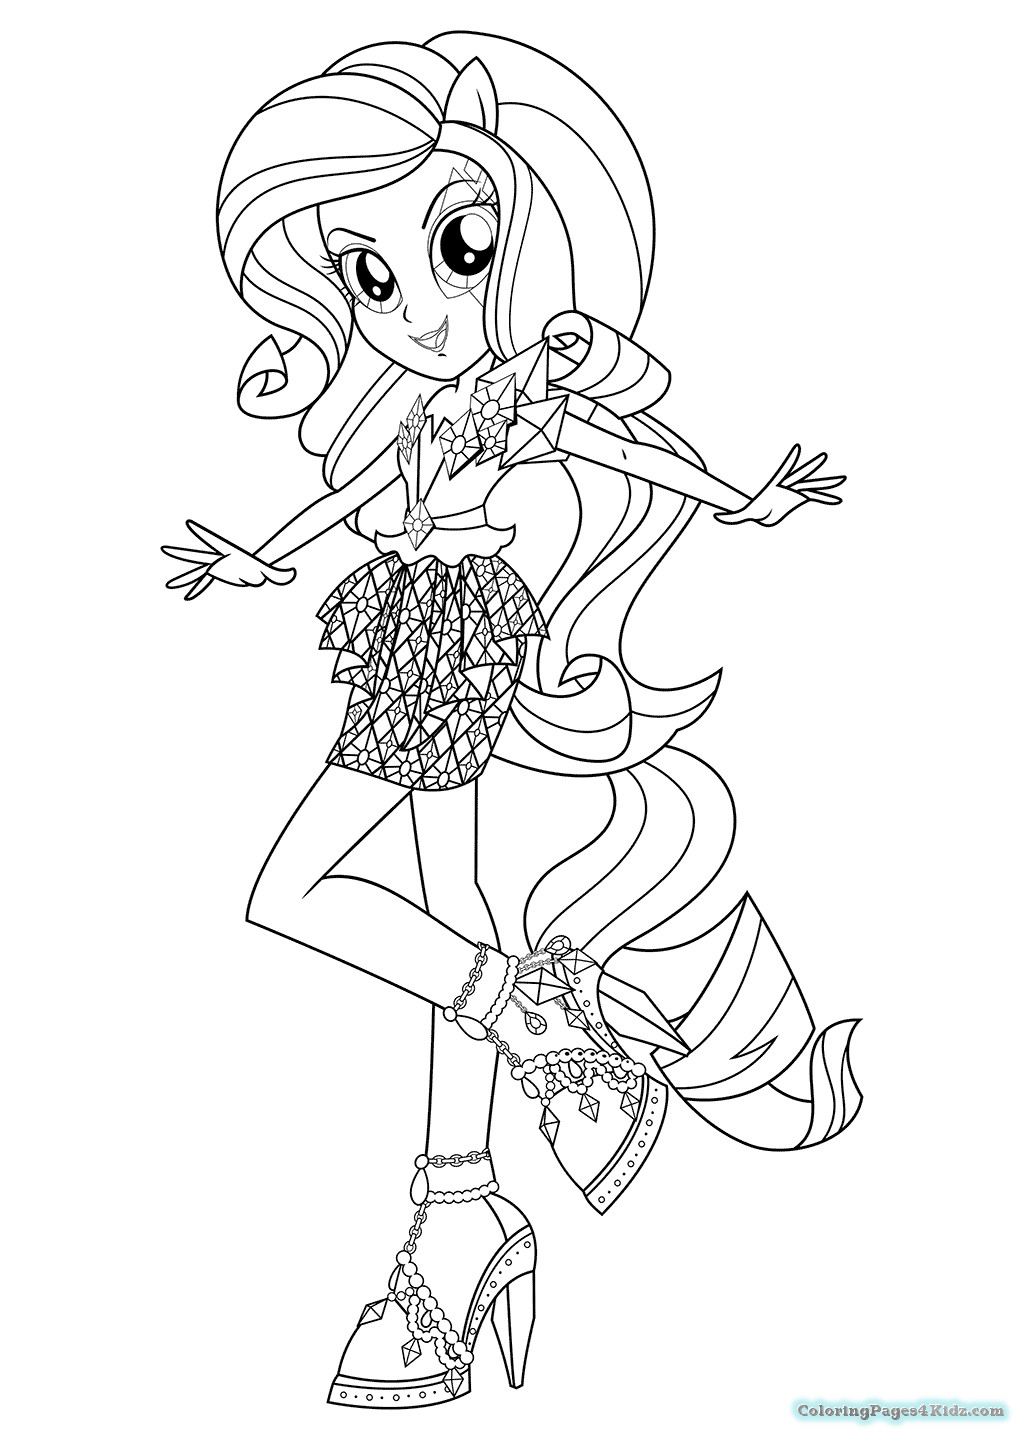 Equestria Girls Rainbow Rocks Coloring Pages
 Equestria Girls Rainbow Rocks Coloring Pages